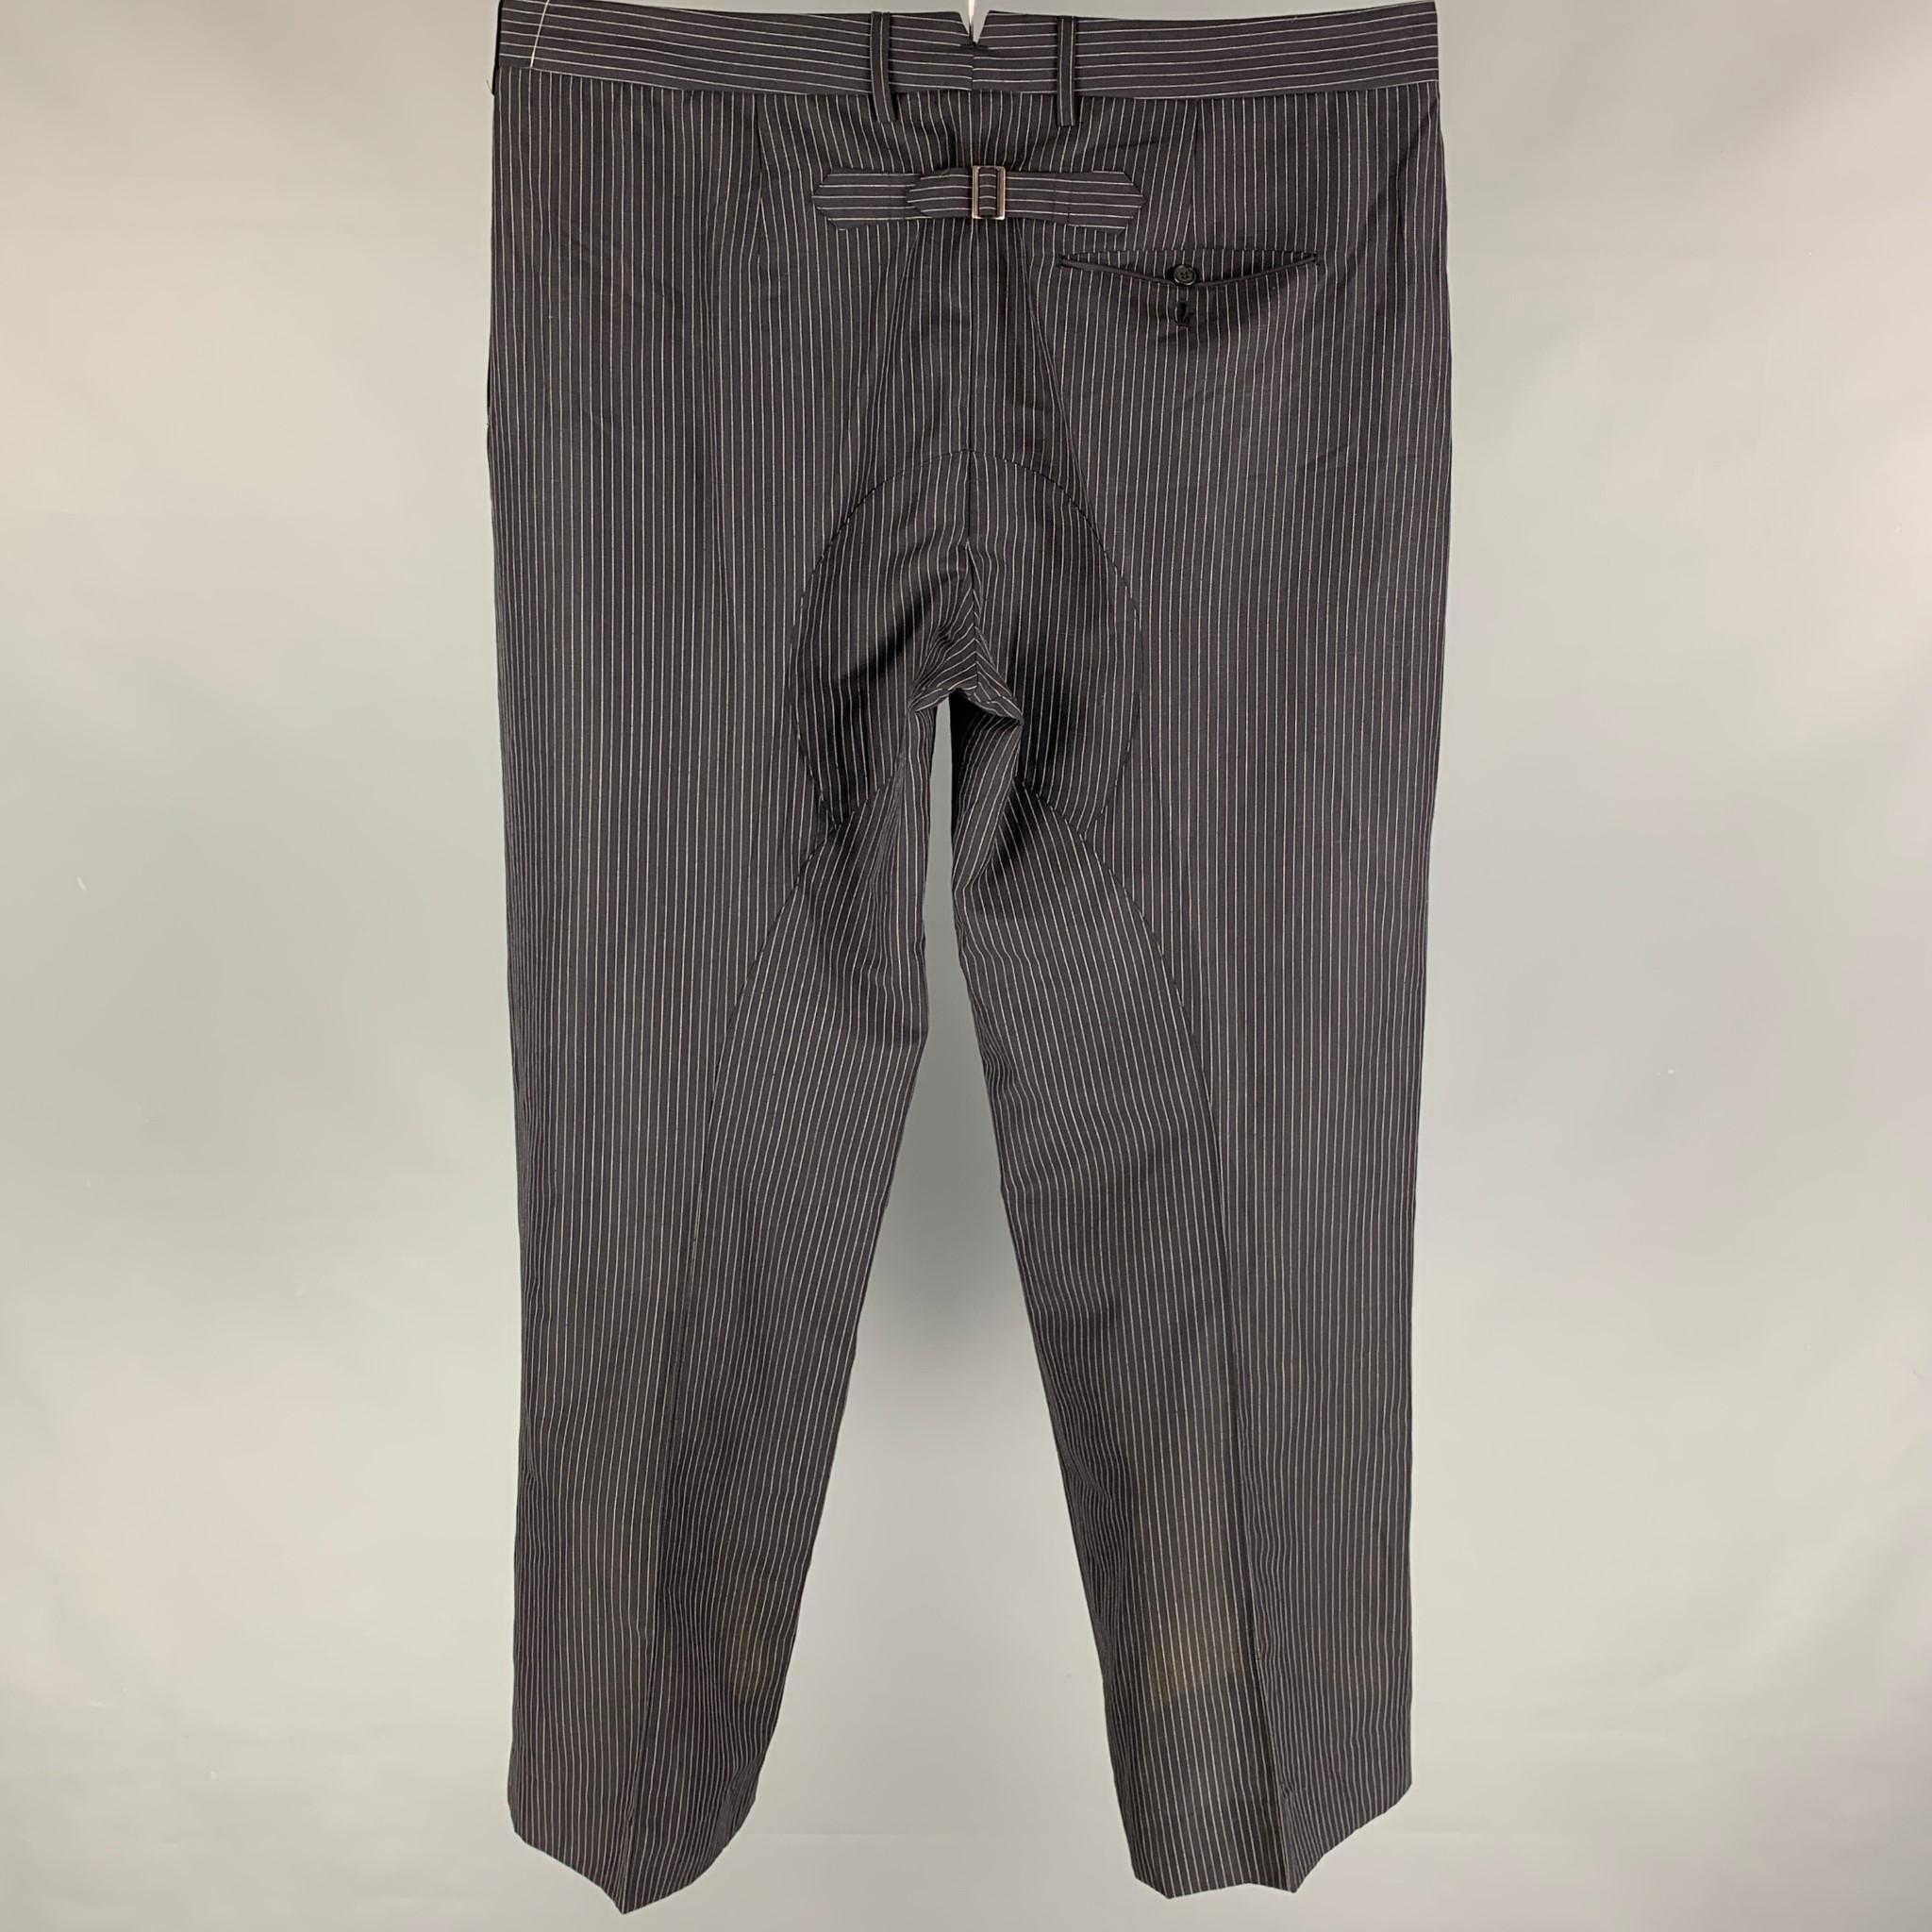 NEIL BARRETT dress pants comes in a black stripe wool featuring a pleated style, wide leg, and a zip fly closure. Made in Italy. 

Very Good Pre-Owned Condition.
Marked: 52

Measurements:

Waist: 38 in.
Rise: 10.5 in.
Inseam: 32.5 in. 